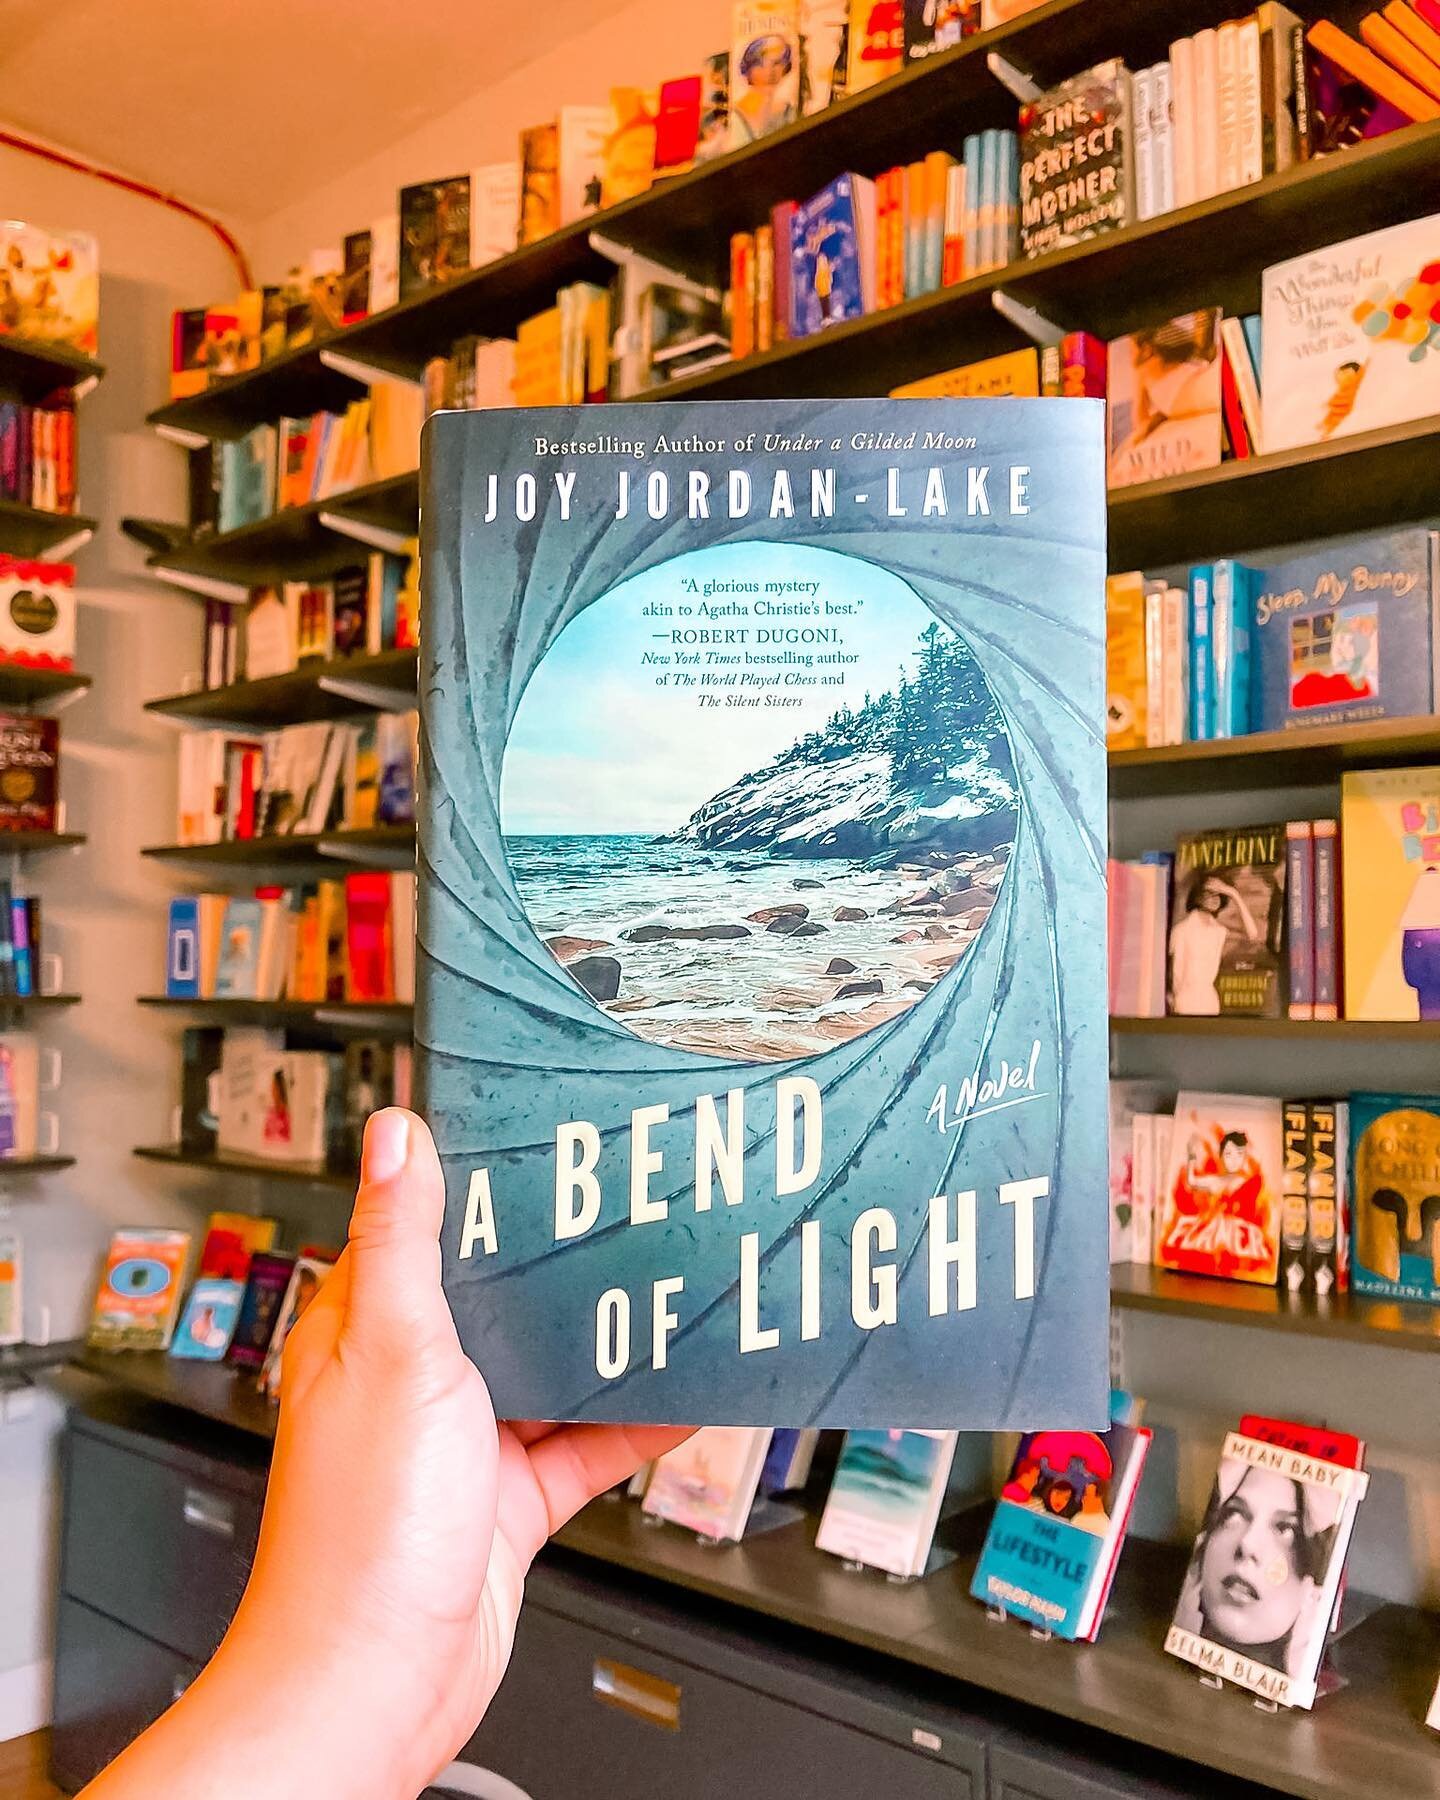 Happy pub day @joyjordanlake_books , whose latest novel A Bend of Light is a must-read for lovers of historical mysteries. 

As Patti Callahan Henry says, &ldquo;From the evocative opening sentence to the shocking conclusion, A Bend of Light is a thr